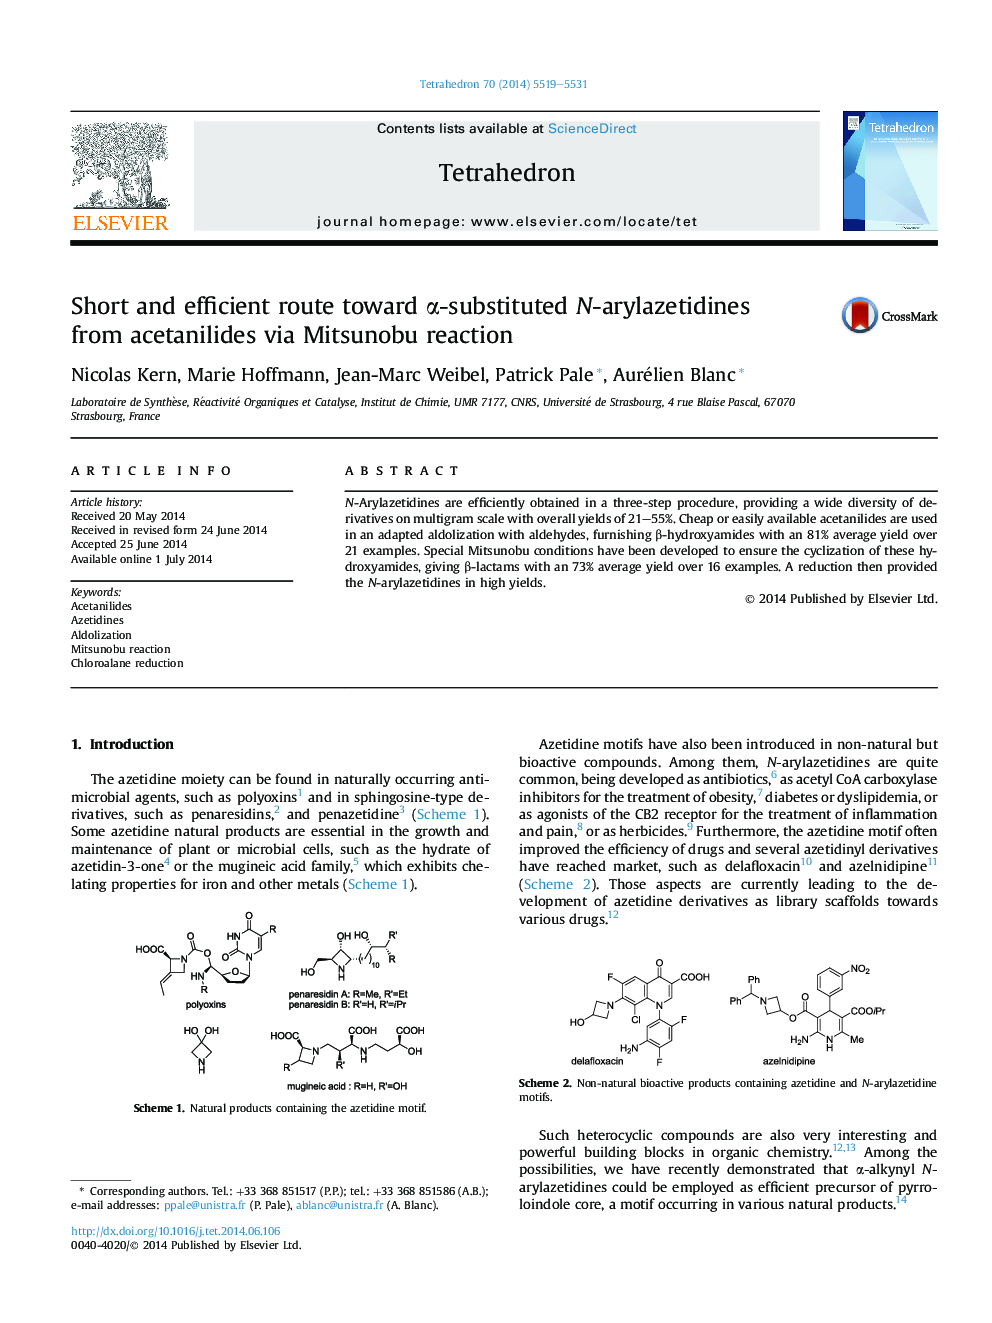 Short and efficient route toward Î±-substituted N-arylazetidines fromÂ acetanilides via Mitsunobu reaction